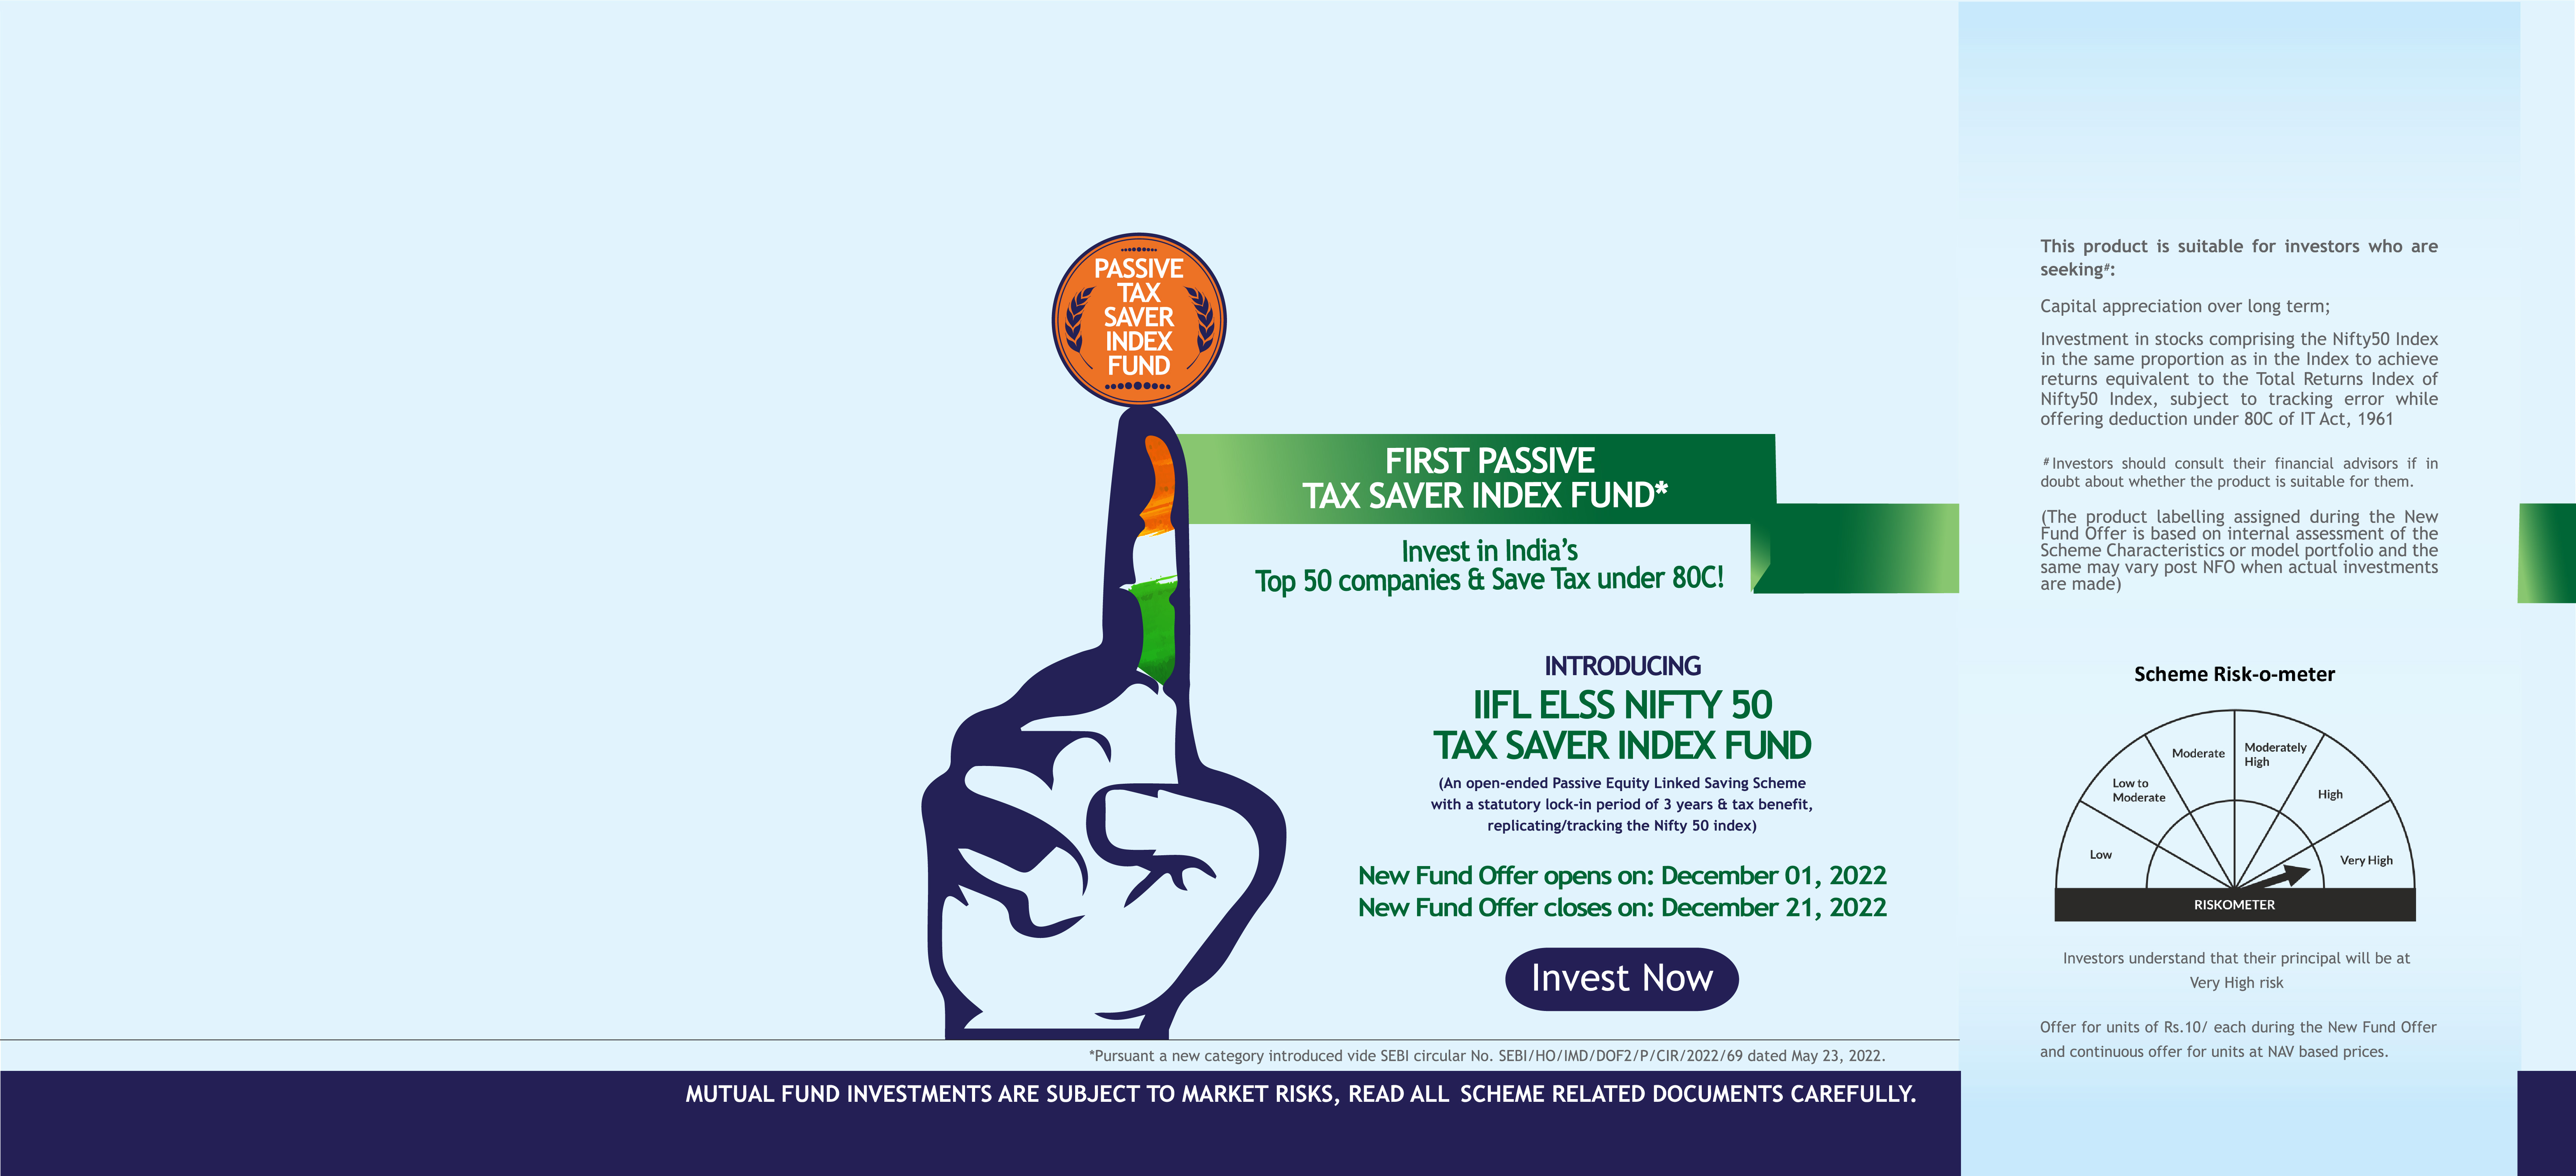 ELSS Nifty50 Tax Saver Index Fund